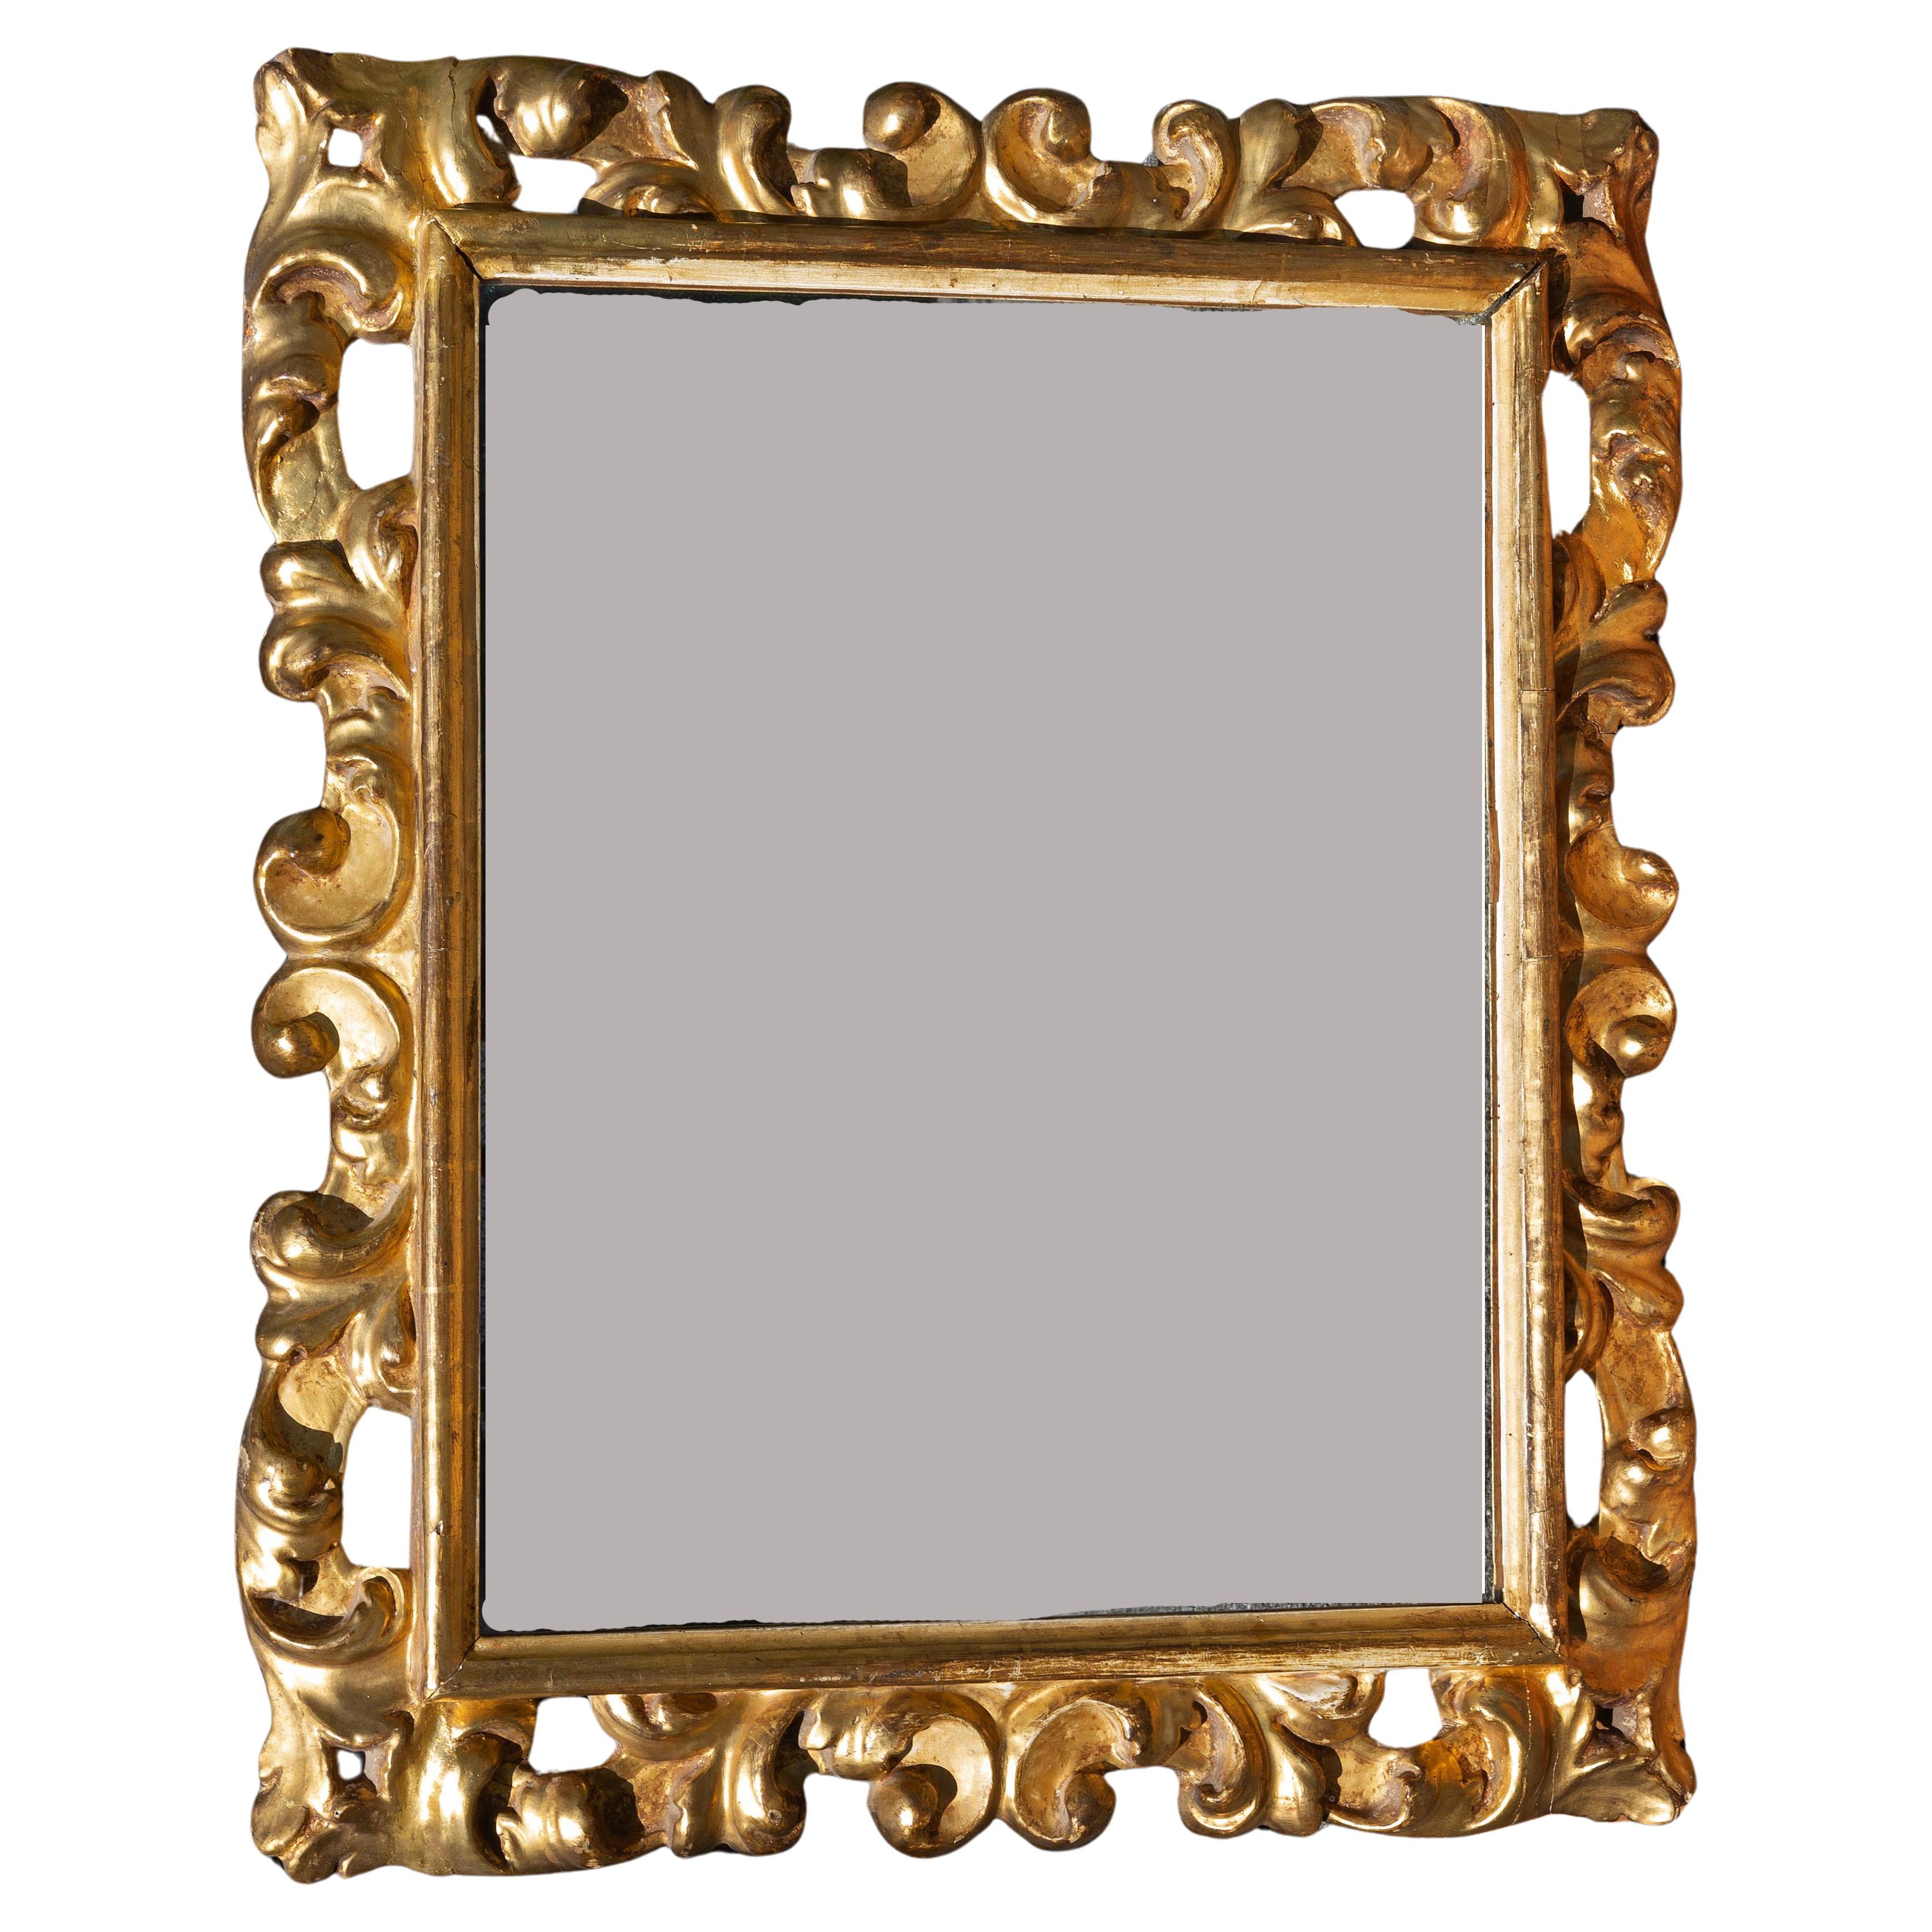 18th century Italian baroque style frame. Hand carved with gold leaf gilding.